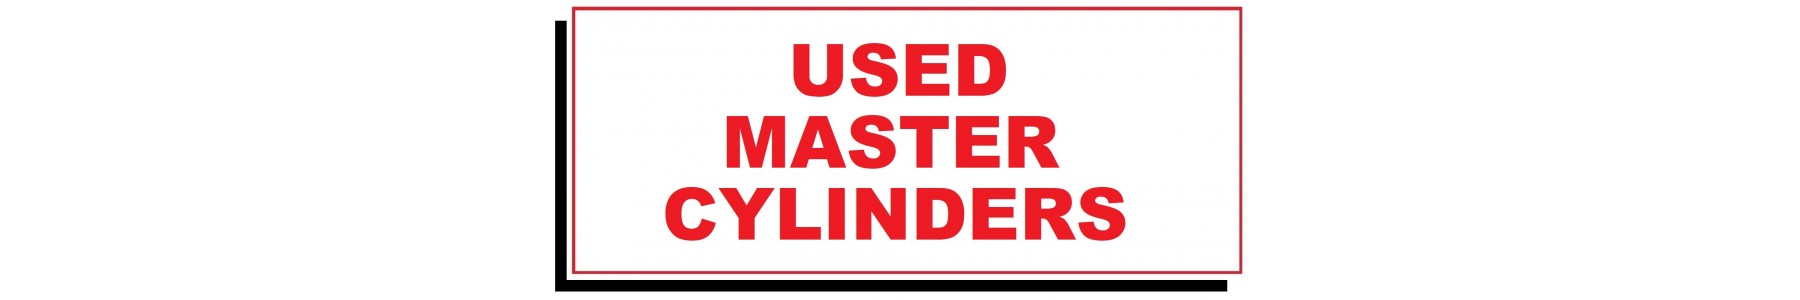 USED MASTER CYLINDERS